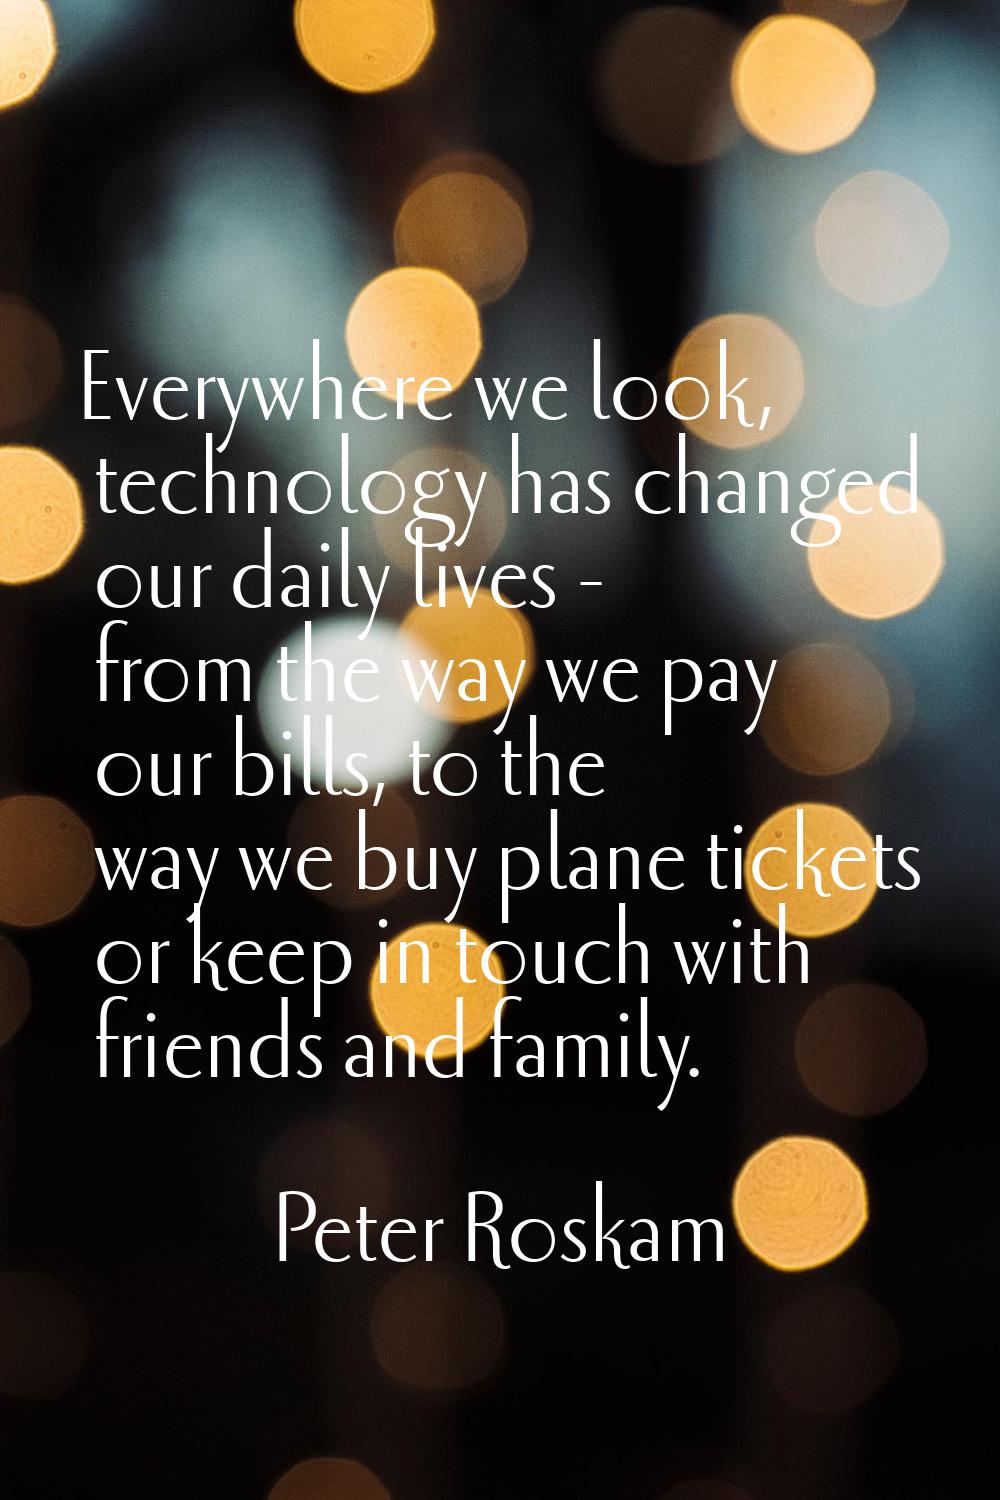 Everywhere we look, technology has changed our daily lives - from the way we pay our bills, to the 